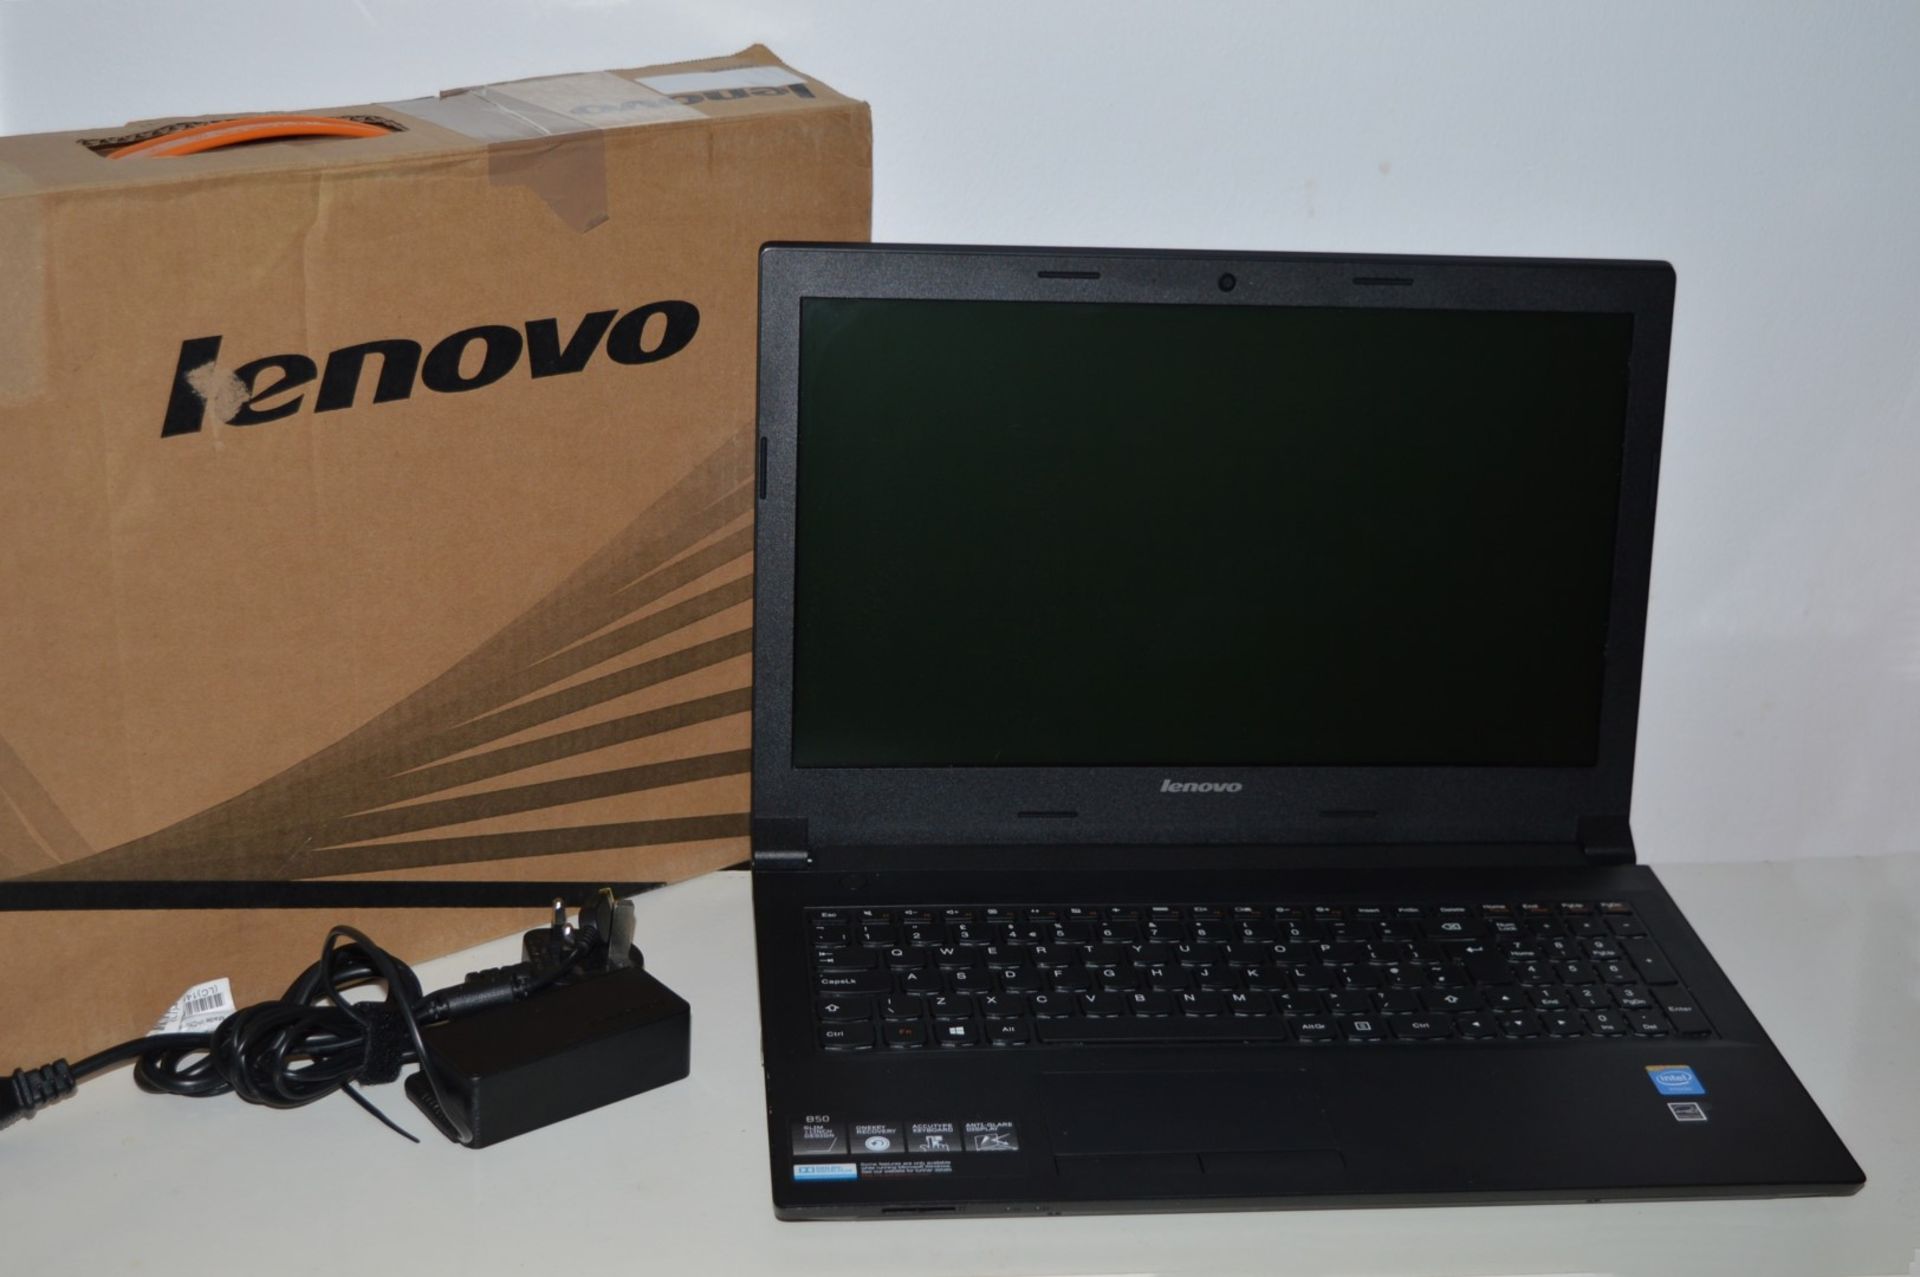 1 x Lenovo B50 Laptop Computer - Features an Intel N2840 2.16ghz Dual Core Proceossor, 4gb Ram, - Image 2 of 11